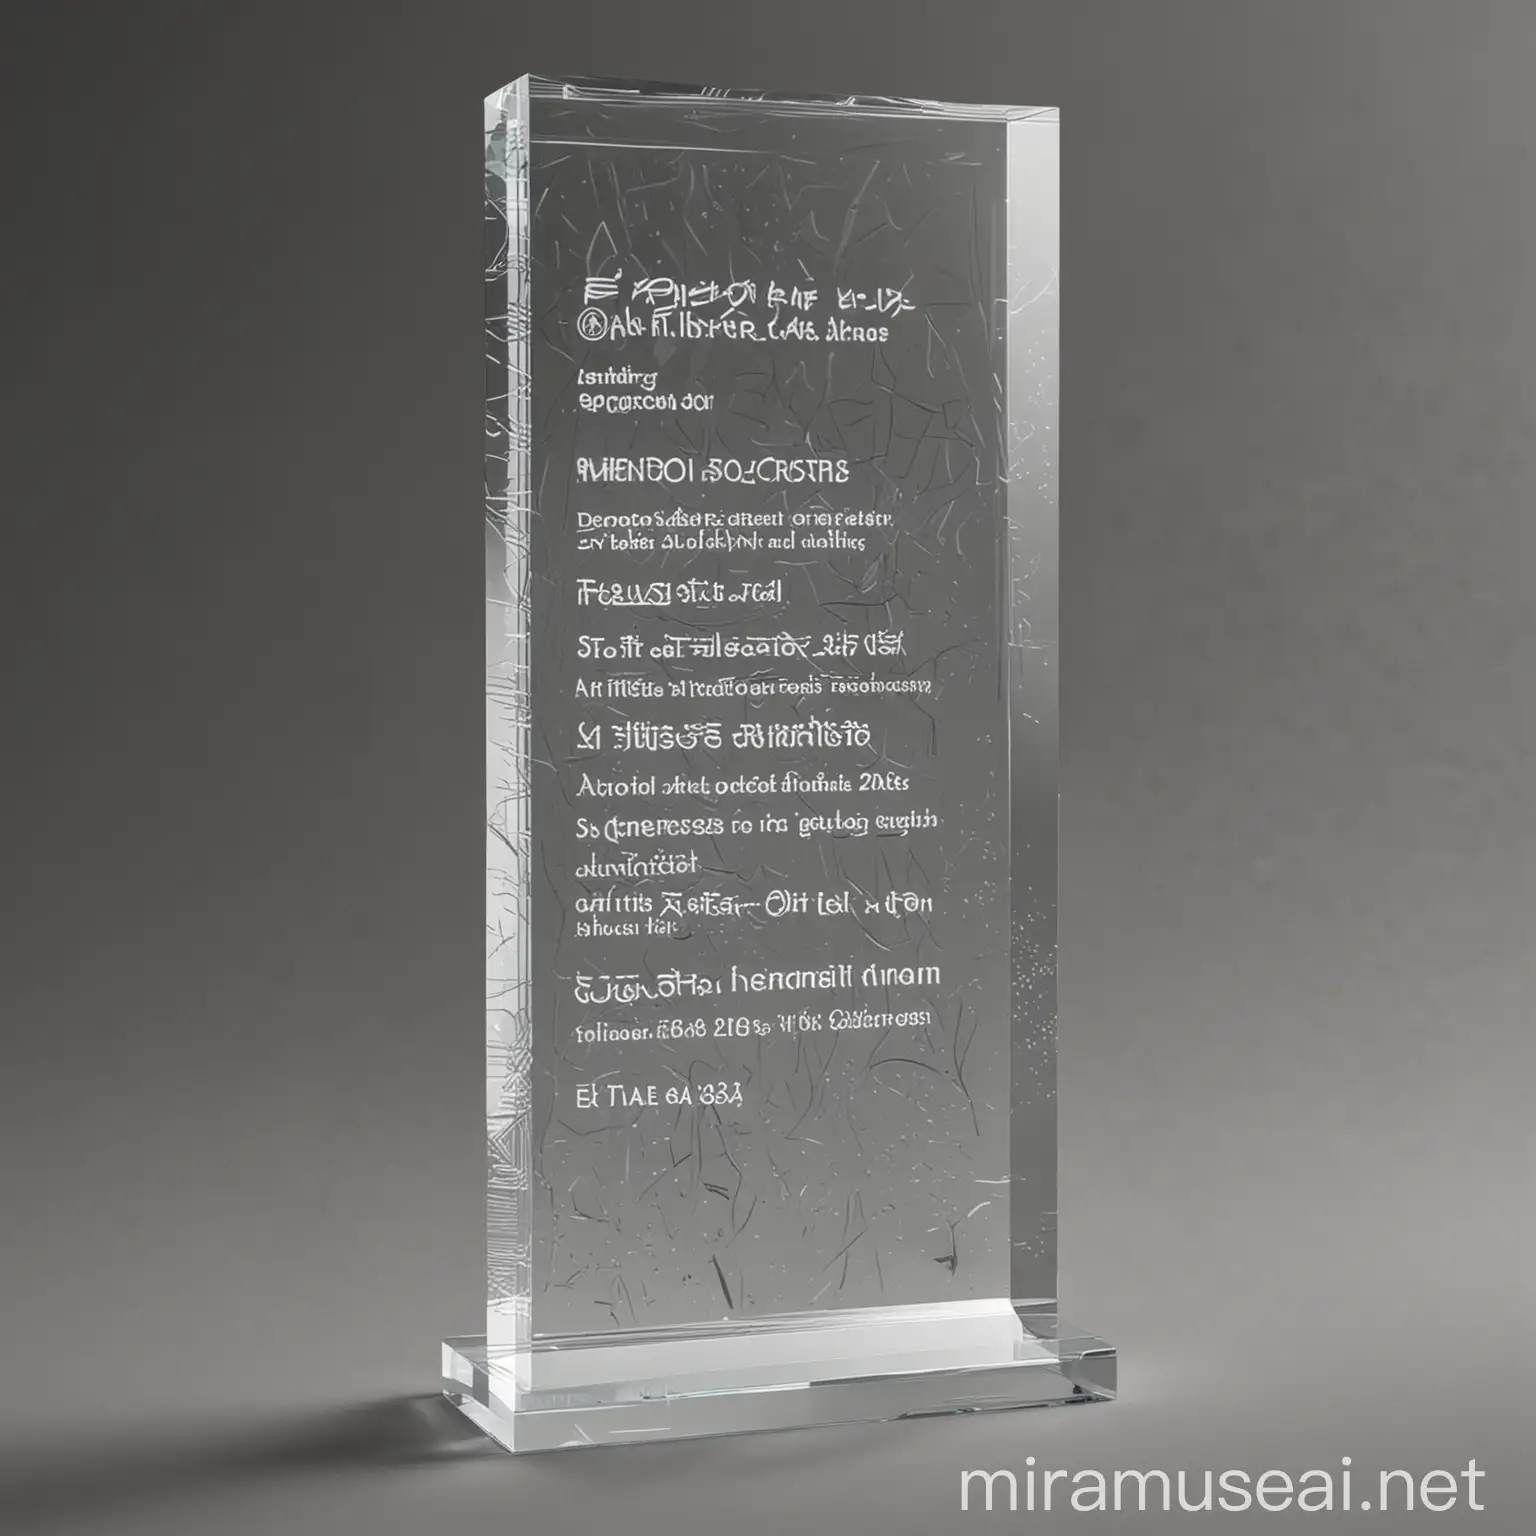 this is an architectural glass award. I want you to remake it with glass texture with an engraved text on the glass pedestal part which says this : Építészeti alkotás Pro architectura 2024